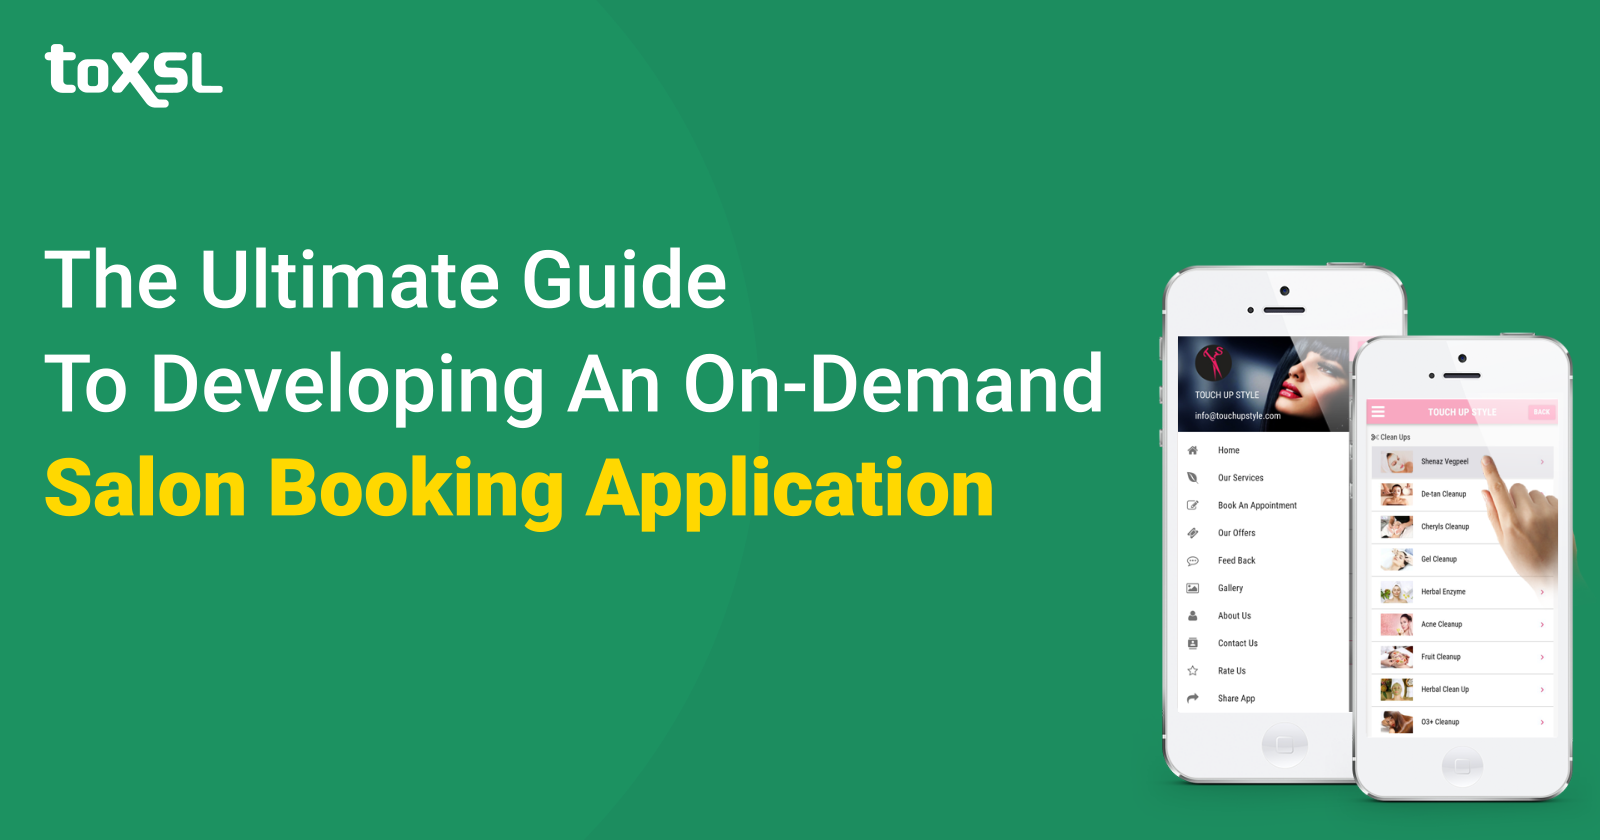 The Ultimate Guide to Developing an On-demand Salon Booking Application